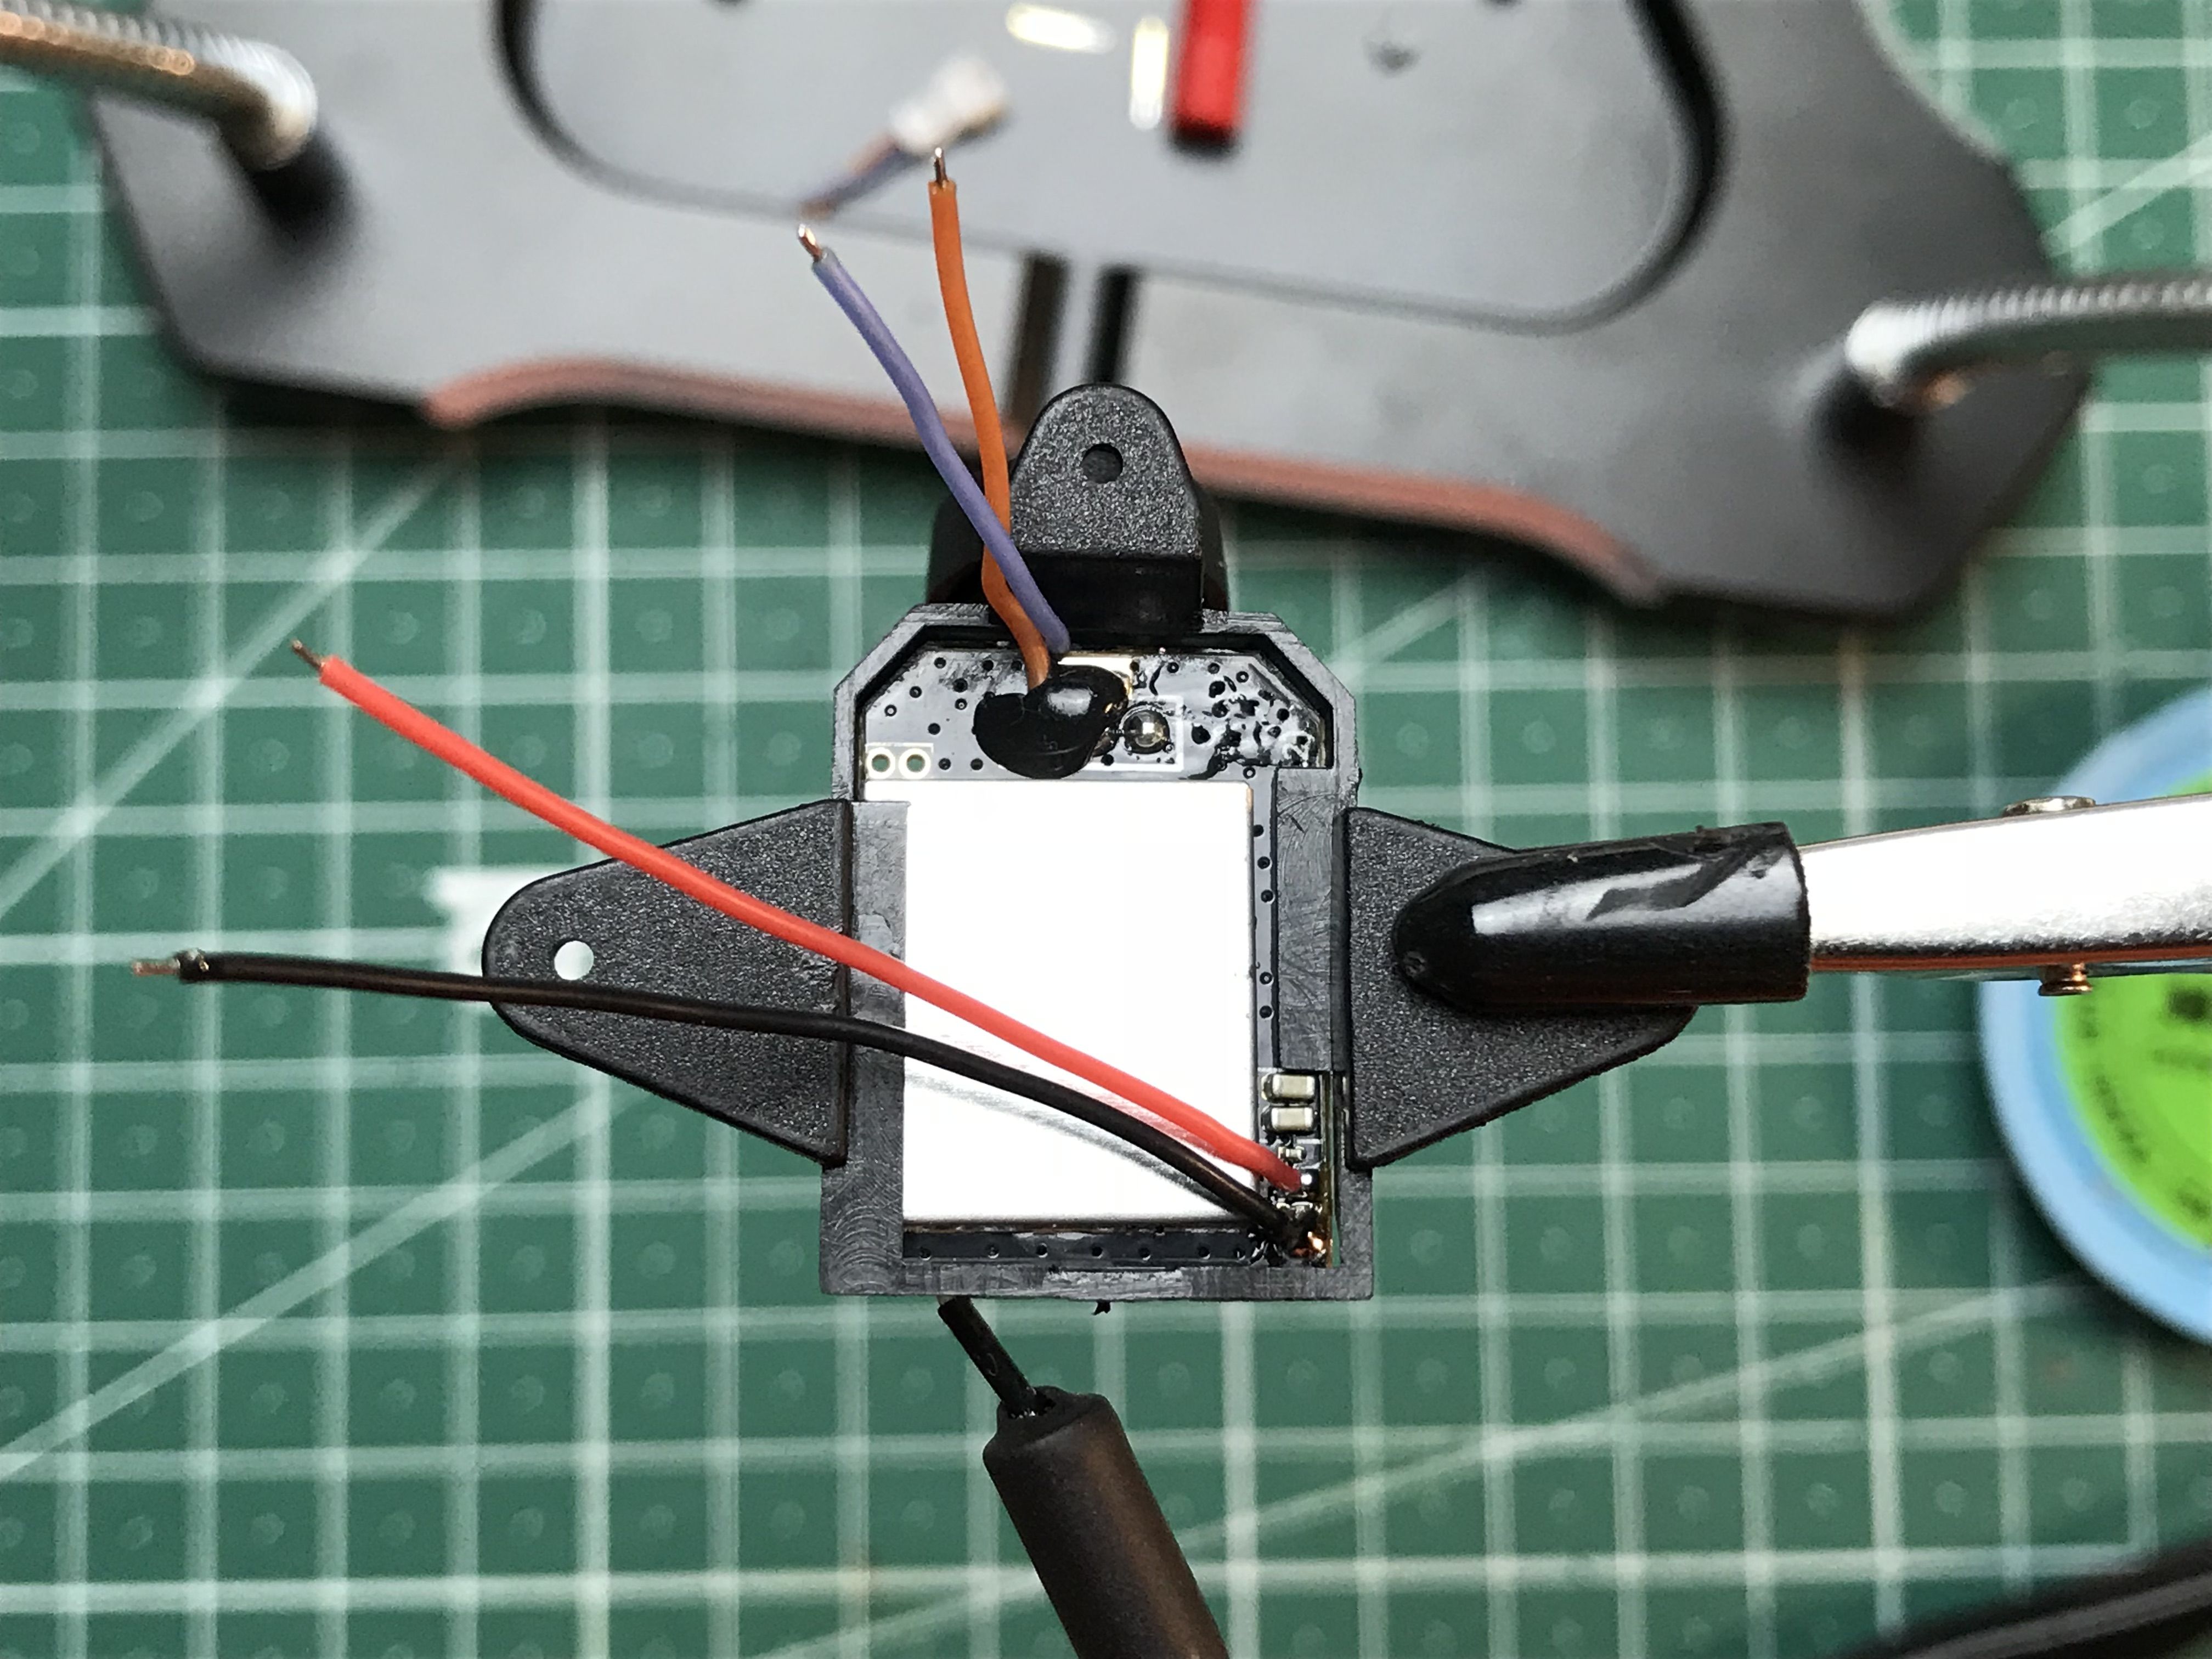 Camera wires cut to length